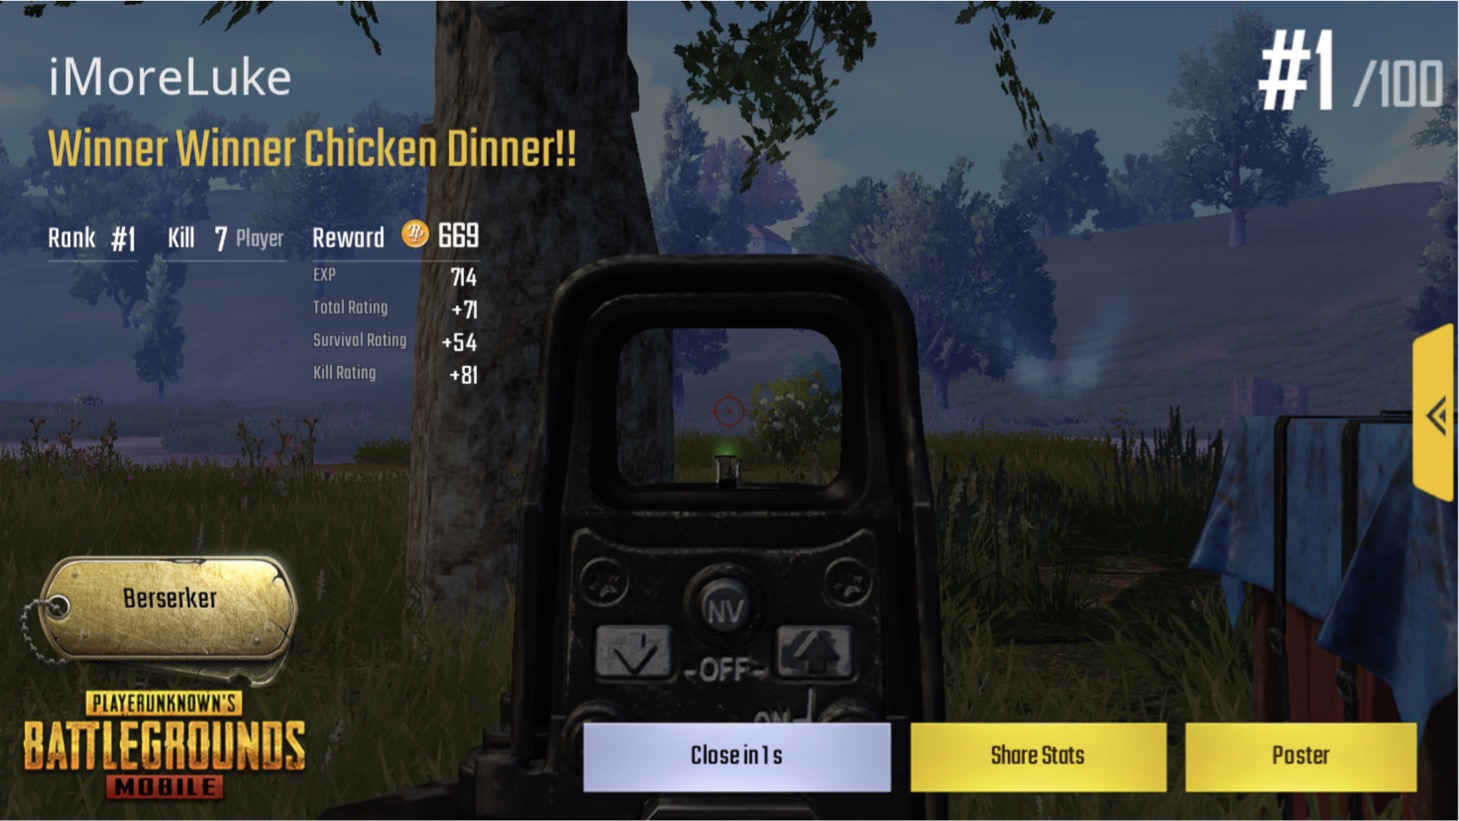 Pubg Mobile Tips And Tricks To Help You Stay Alive Imore - there s no doubt about it in pubg mobile there s a bit of luck if you happen to land in a spot that has good equipment and or always end up being in the